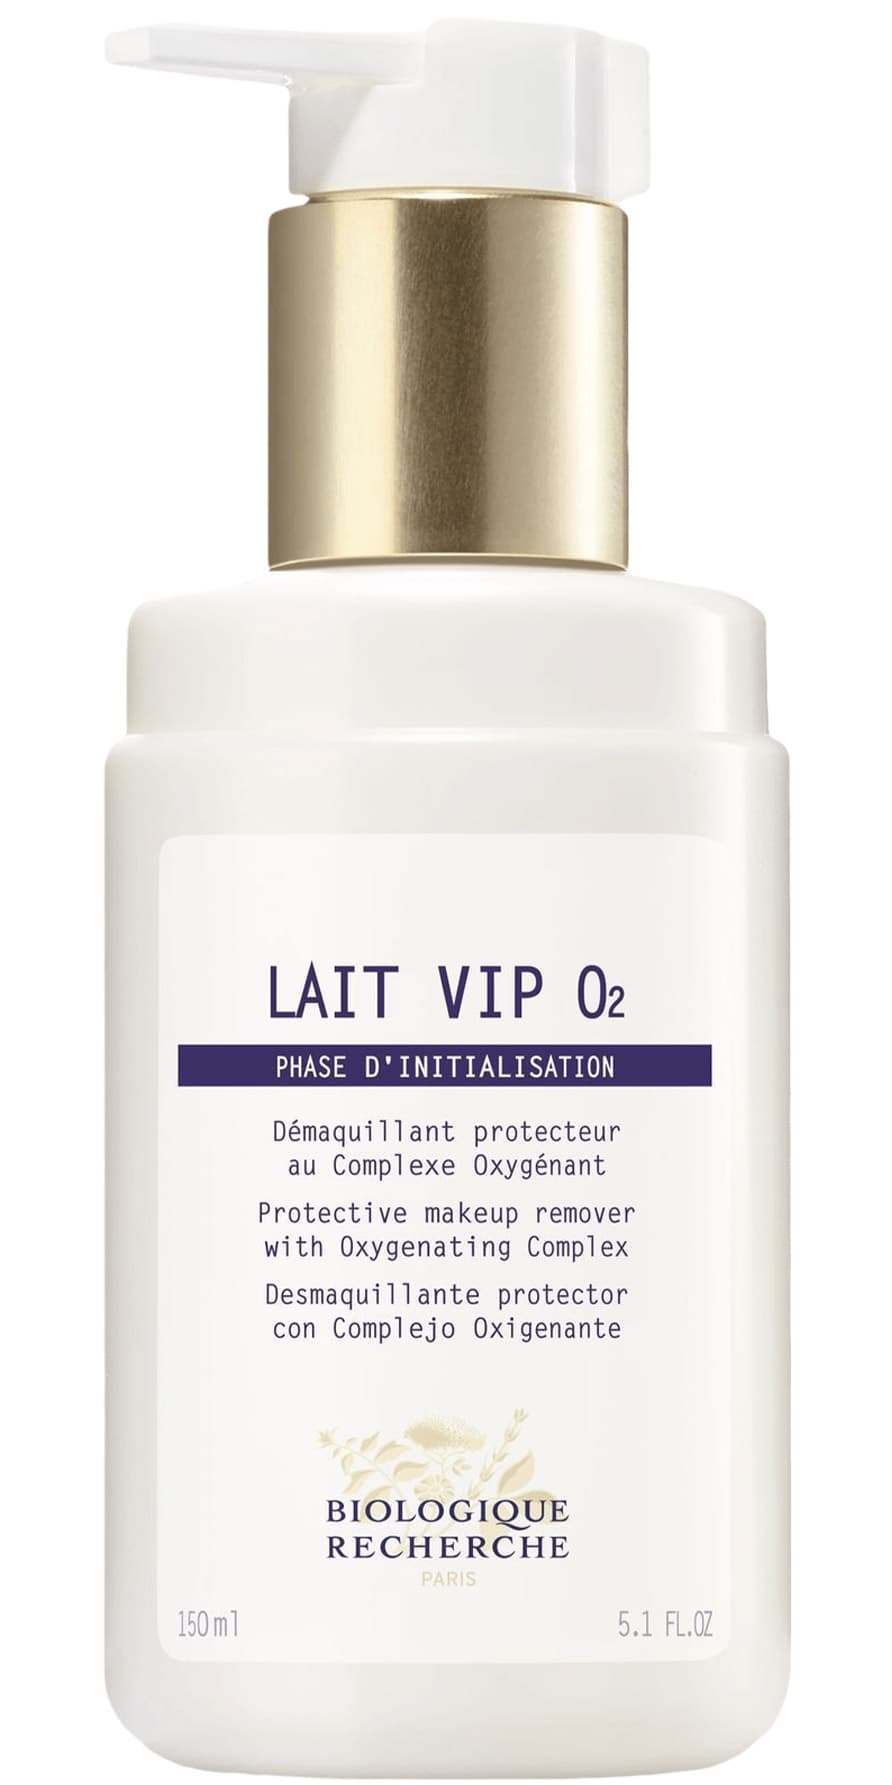 variant-150ml-product-page-image